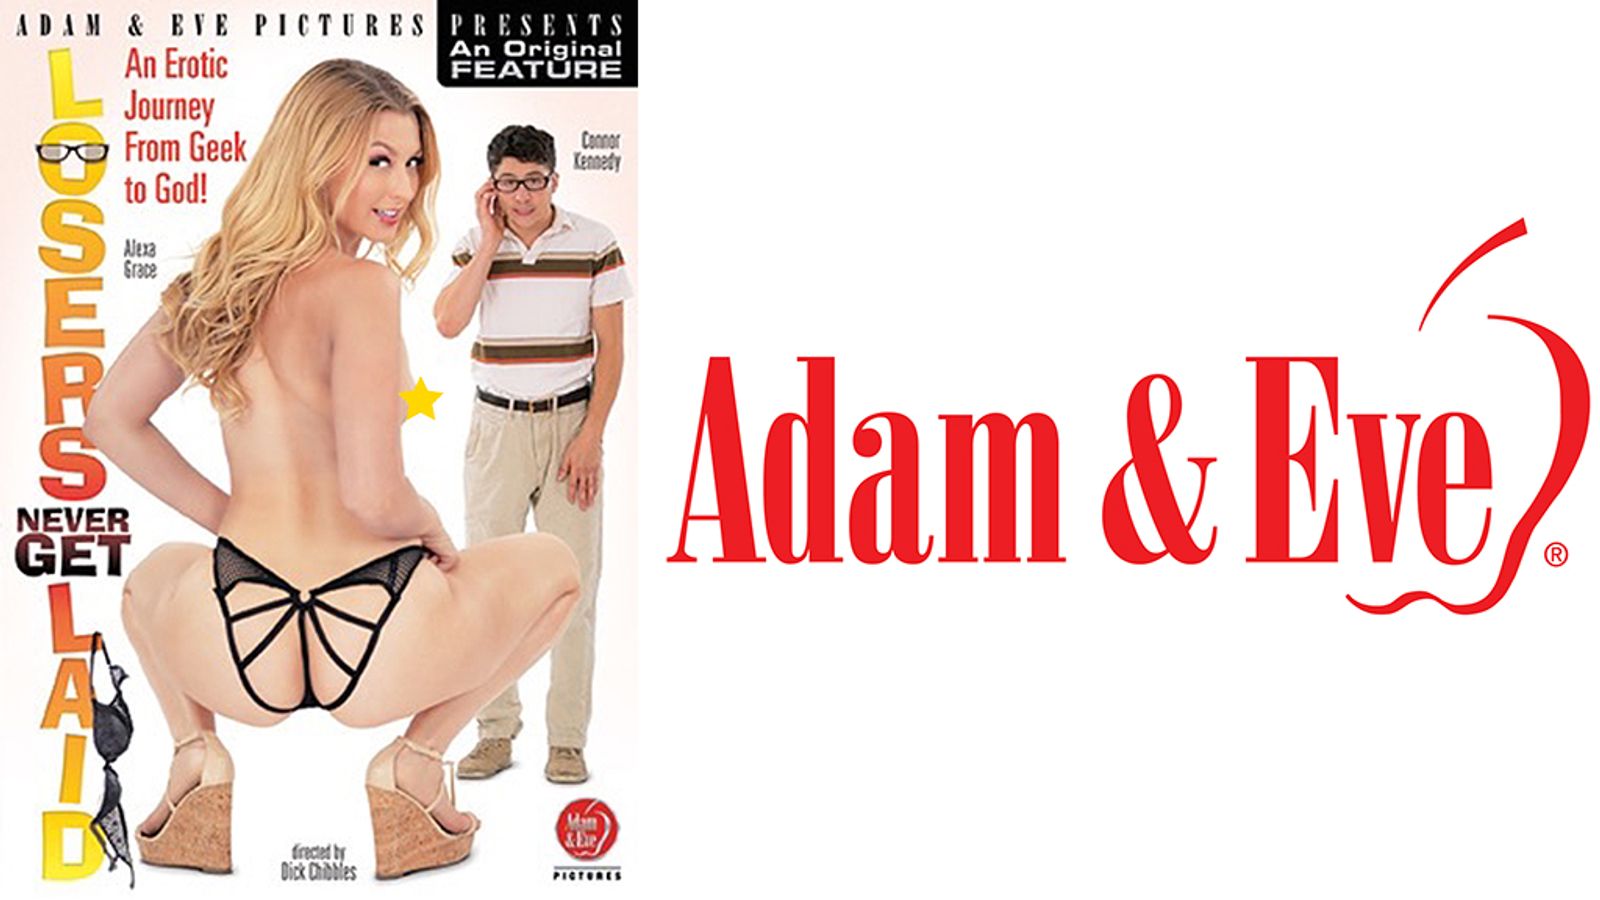 Who Says ‘Losers Never Get Laid’? Adam & Eve's New DVD!